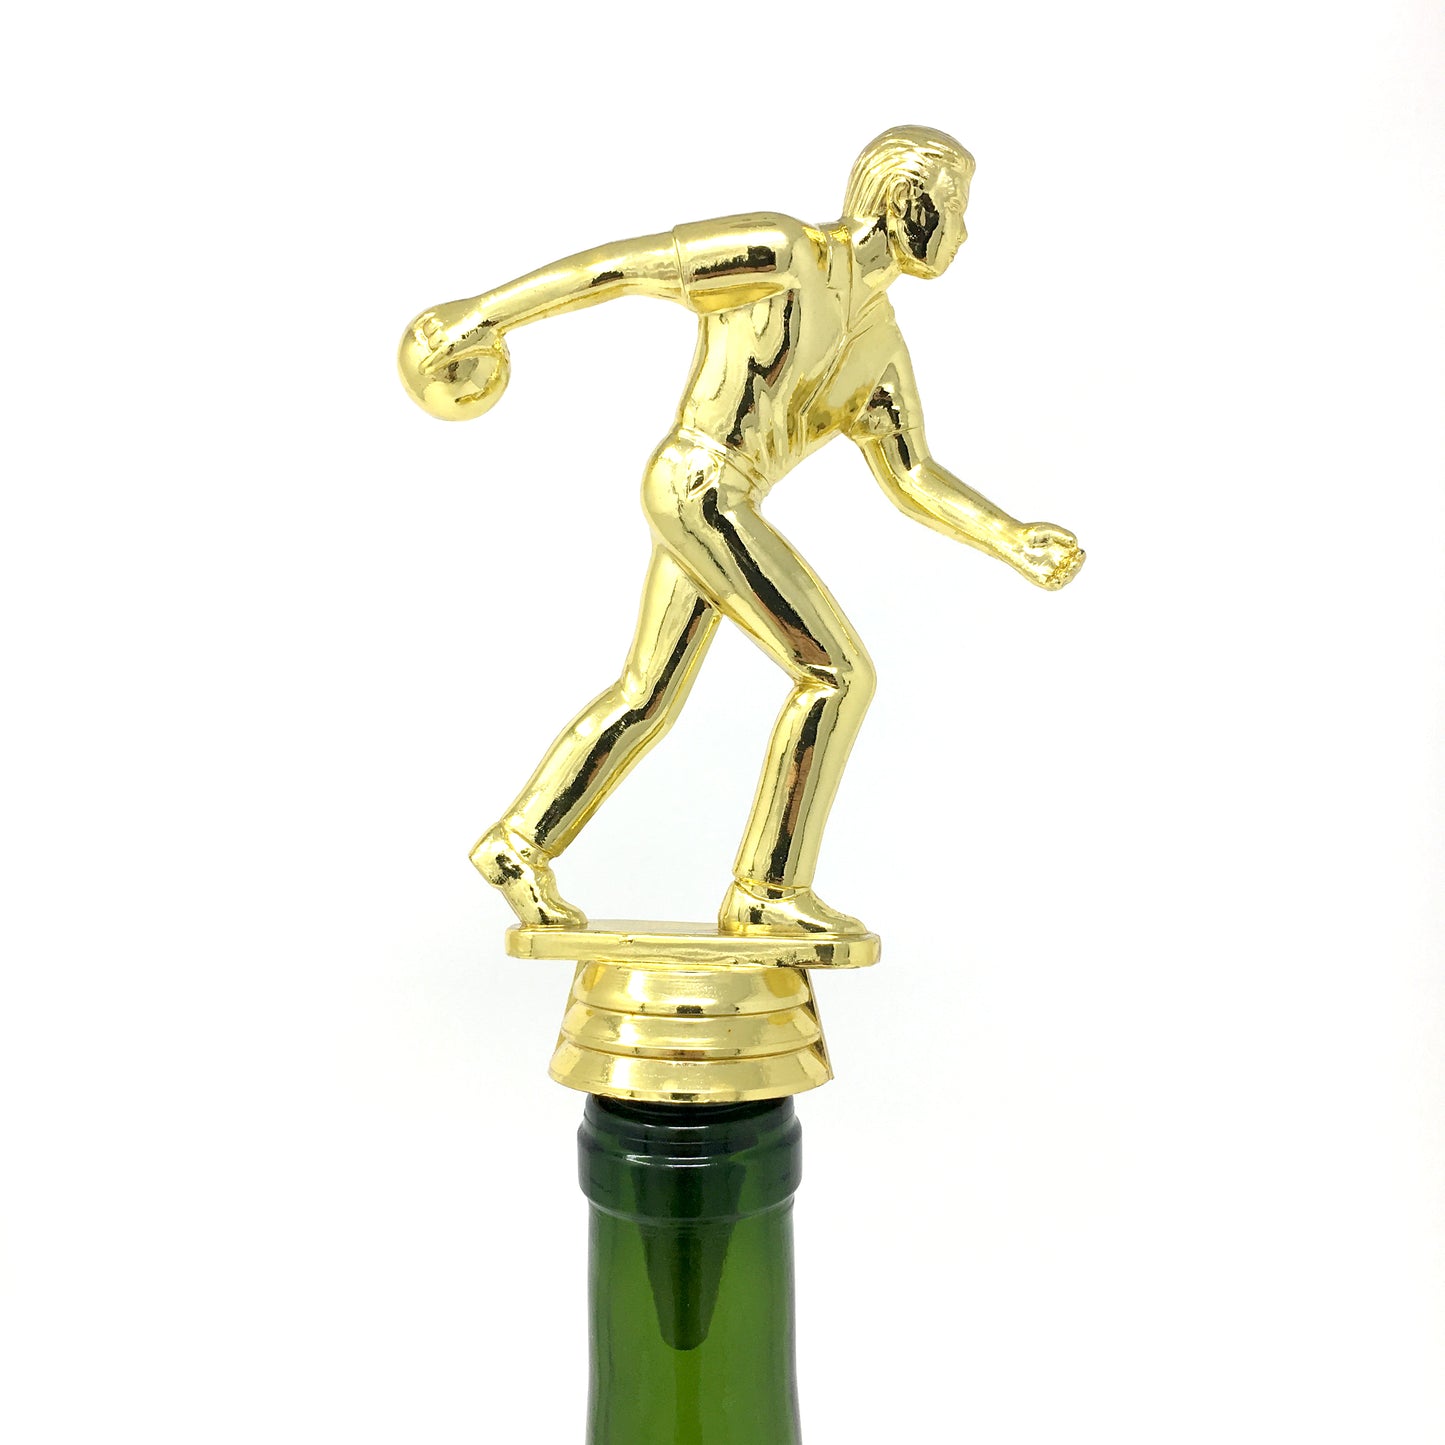 Bowling Trophy Wine Bottle Stopper with Stainless Steel Base